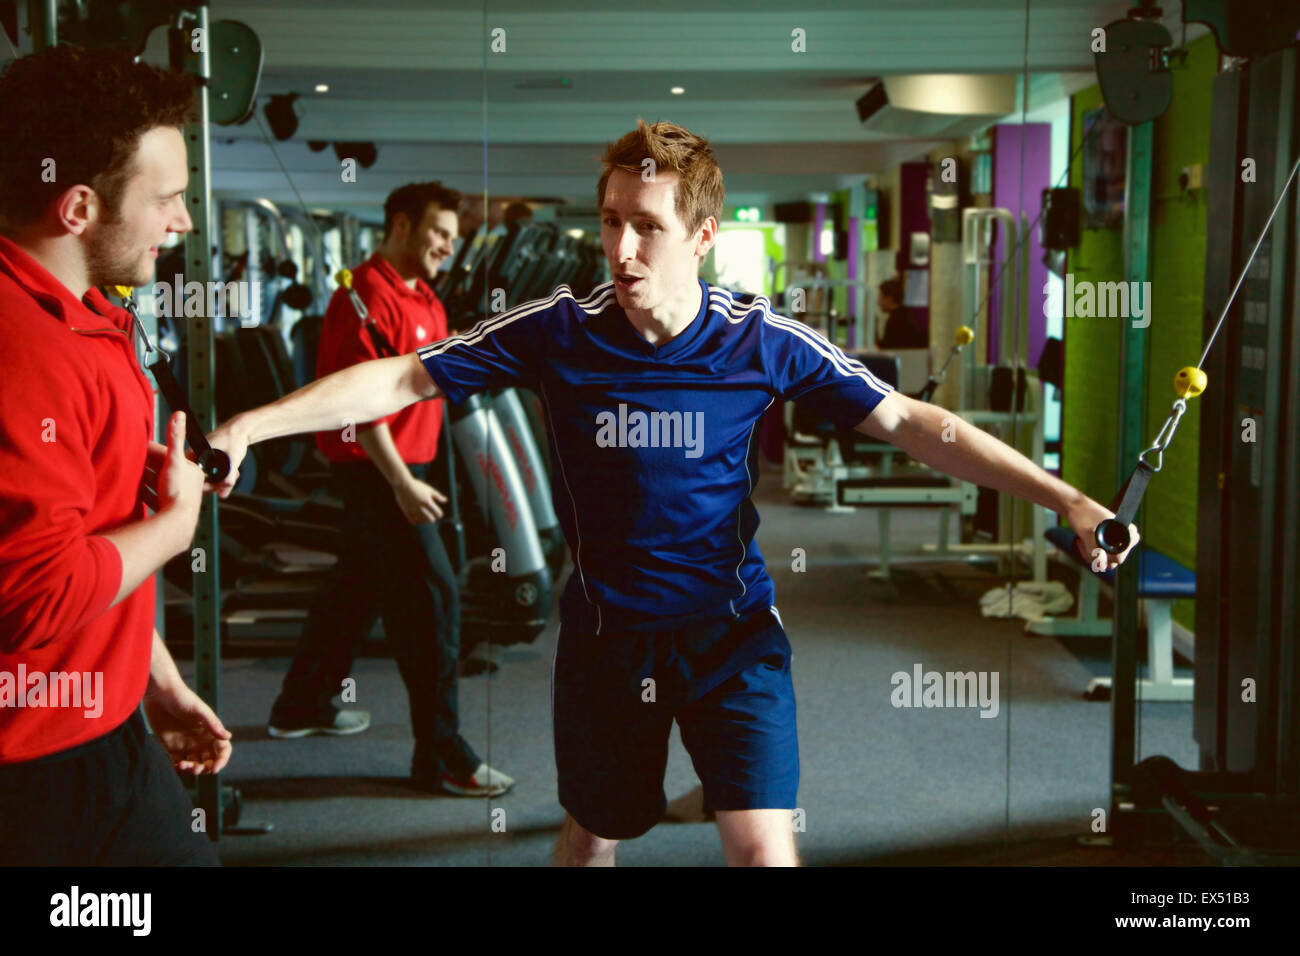 Personal Trainer Instructing Man at Gym Stock Photo